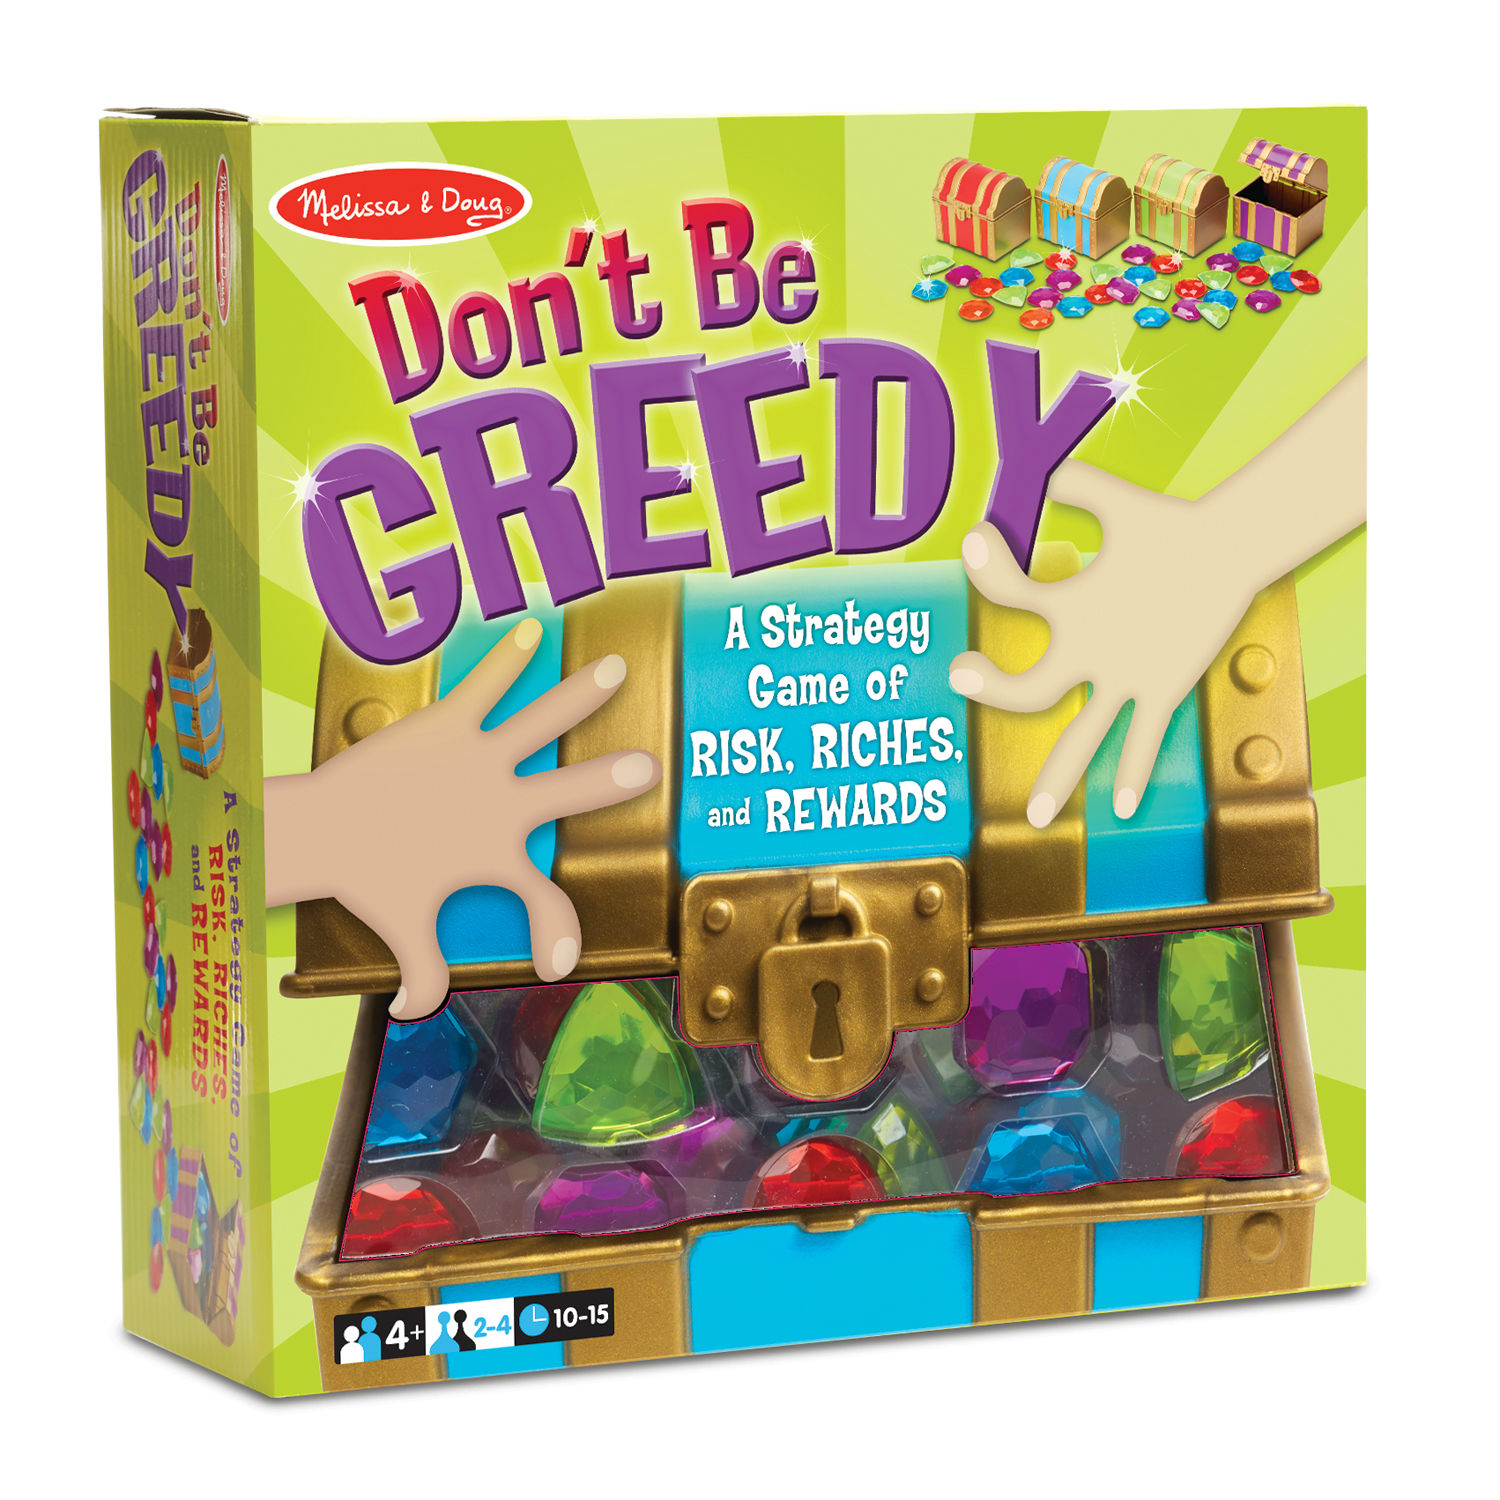 Don't Be Greedy - Scratch and Dent